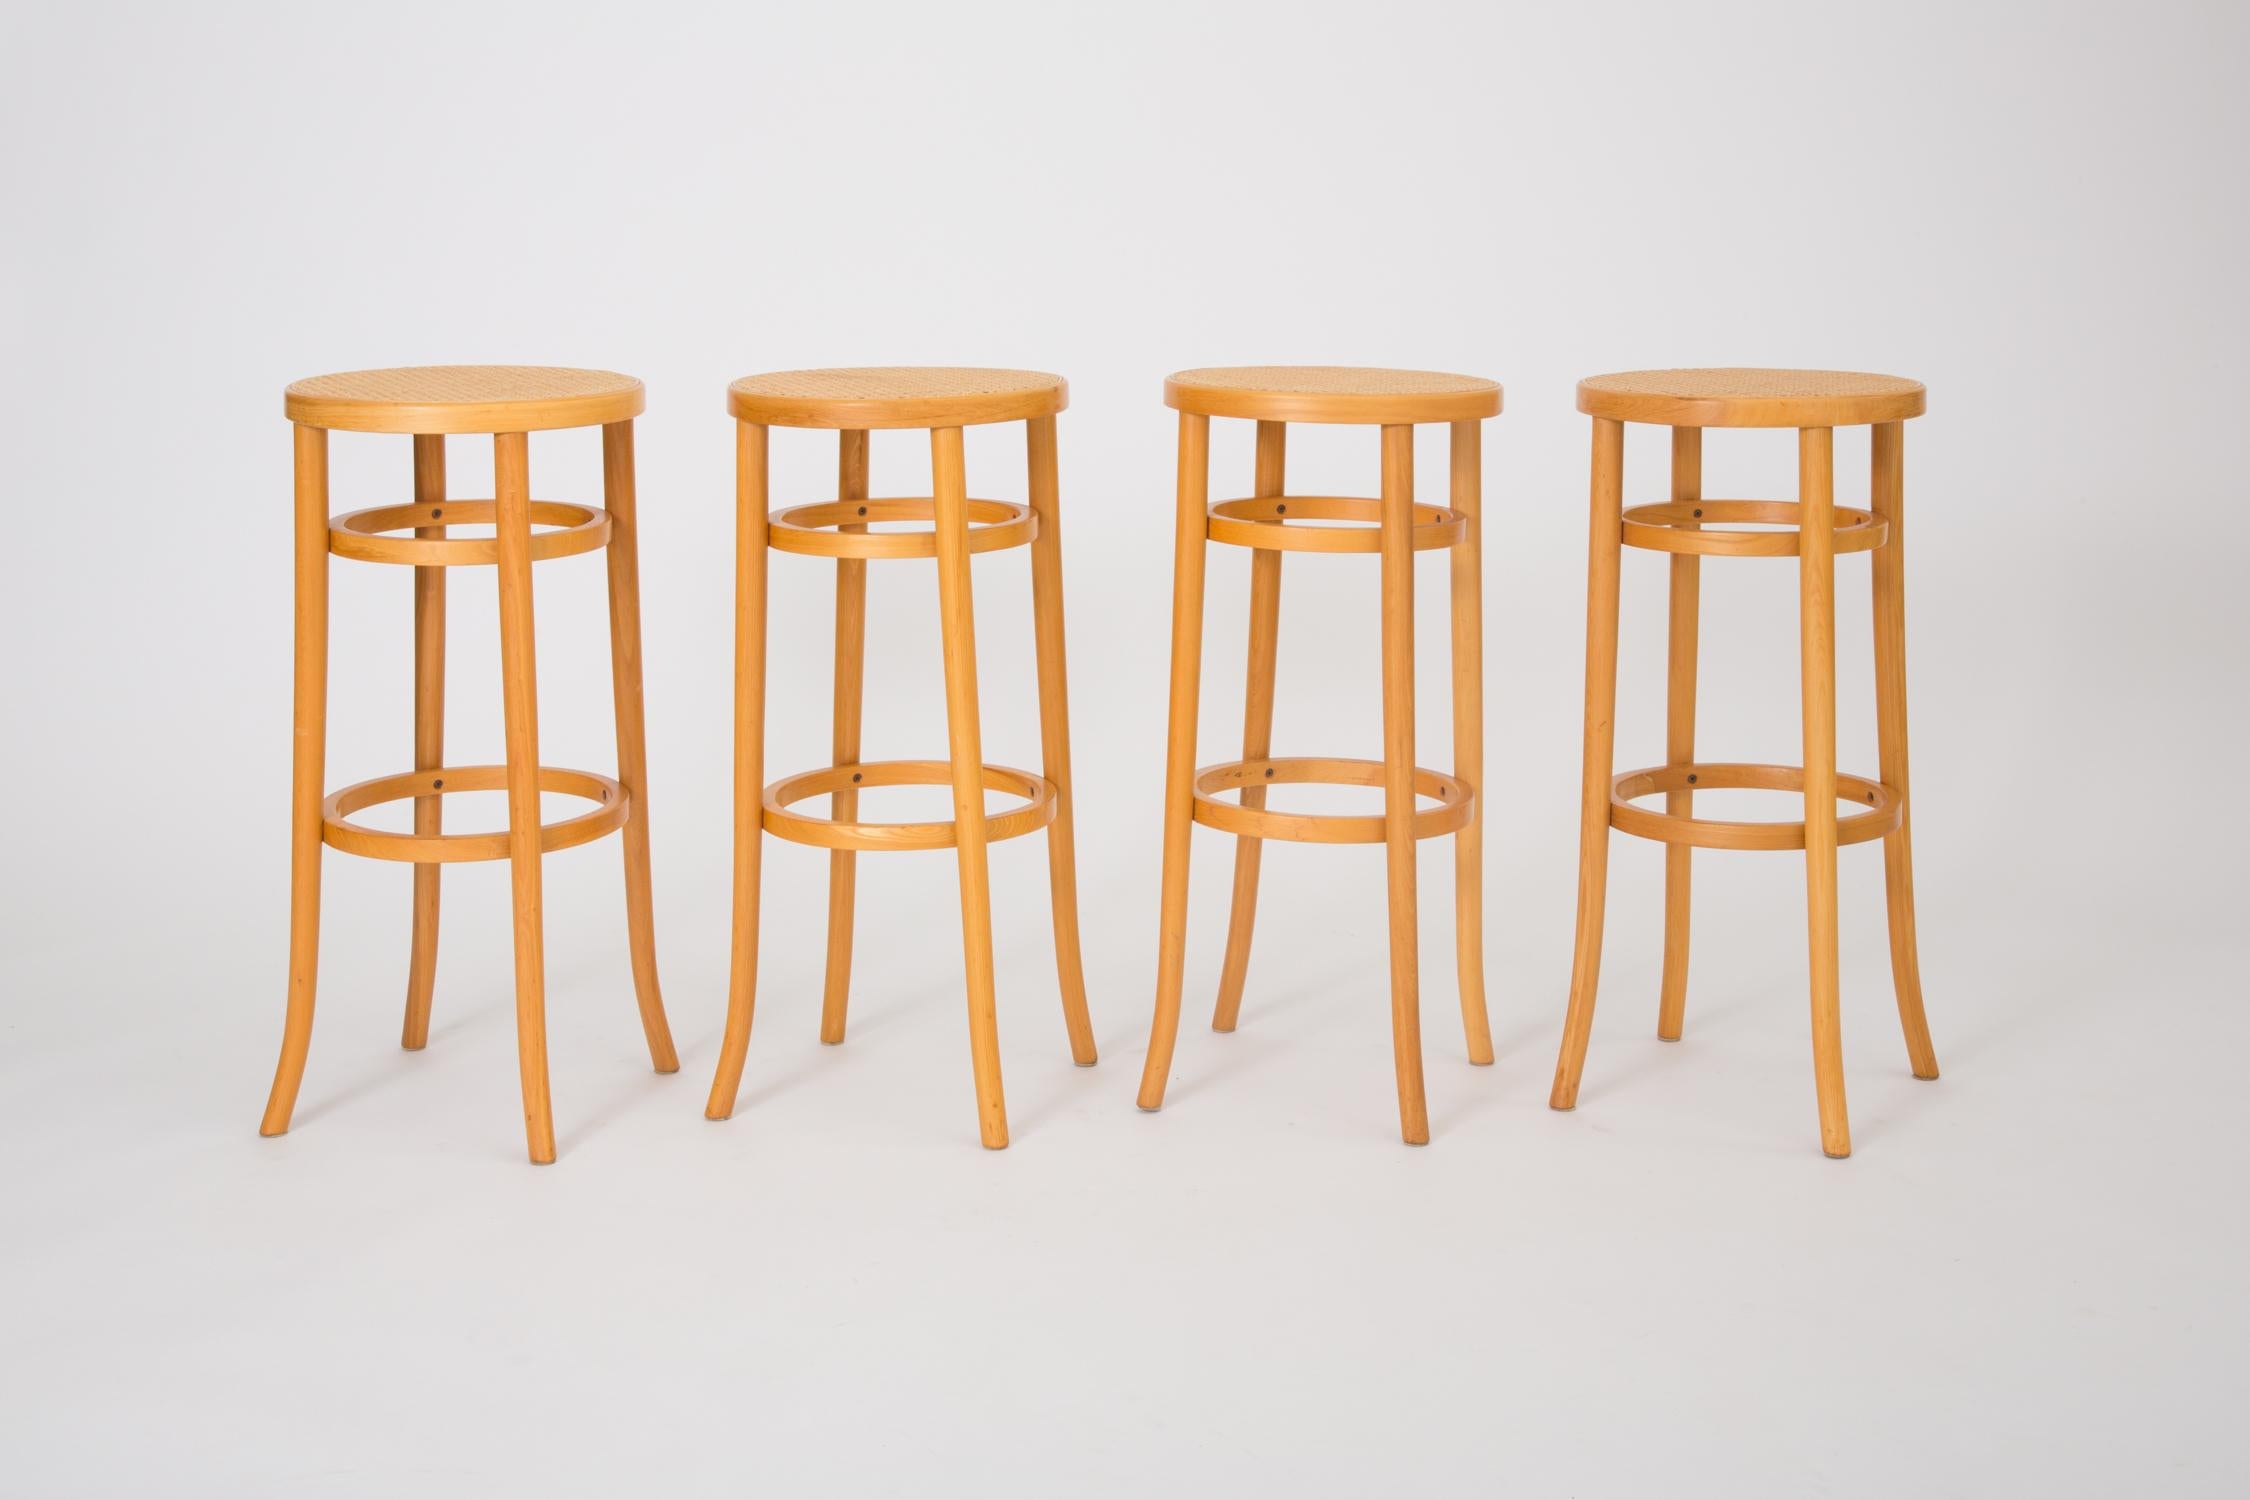 A set of four 1980s American-made Thonet Industries round bar-height stools, manufactured in Thonet’s signature bent birchwood with woven cane seats. Each stool has four rounded saber legs and two support rings below the seat and at foot level. The